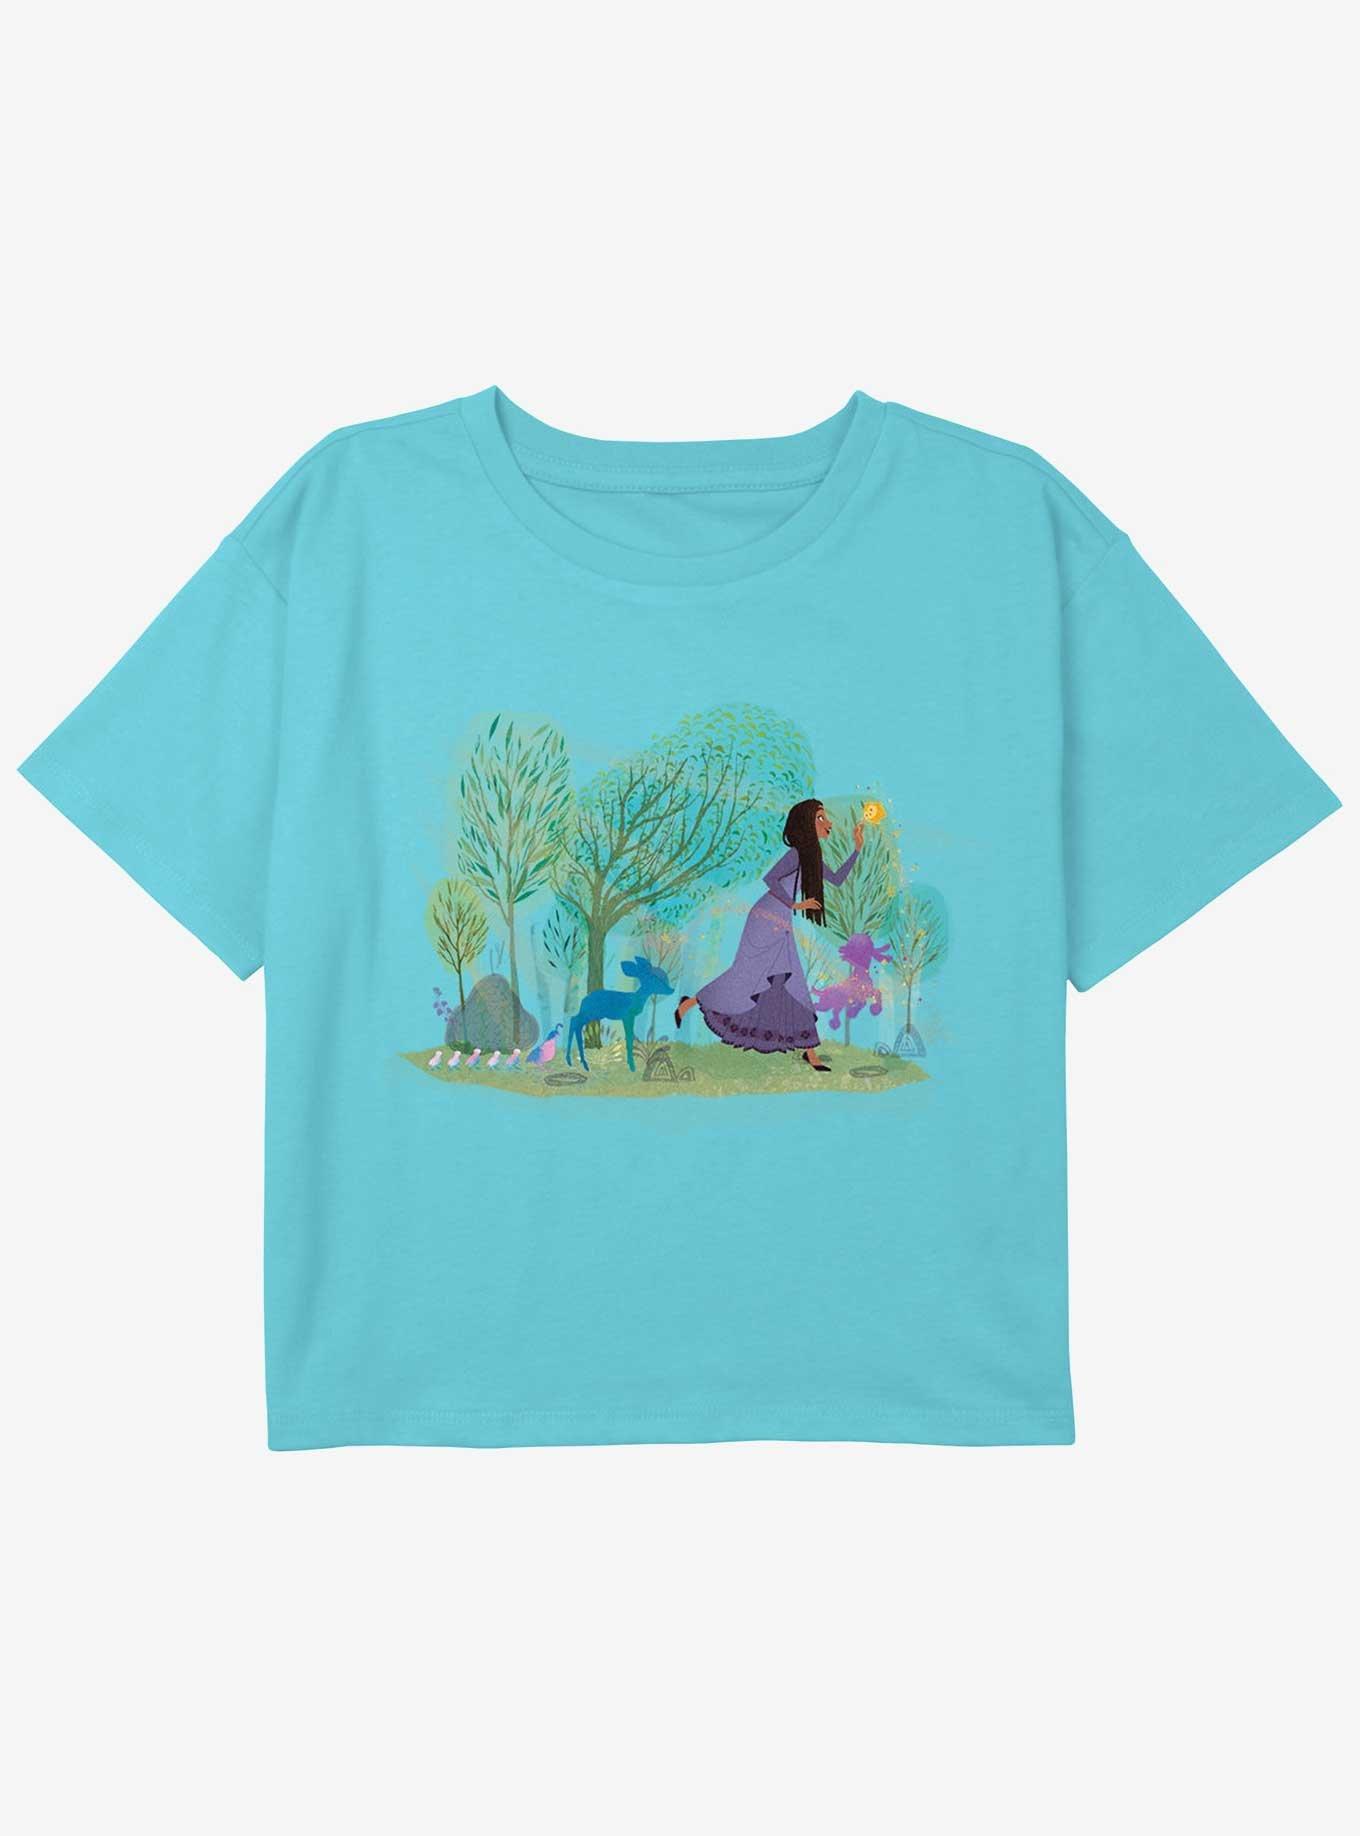 Disney Wish Play With Friends Girls Youth Crop T-Shirt, BLUE, hi-res